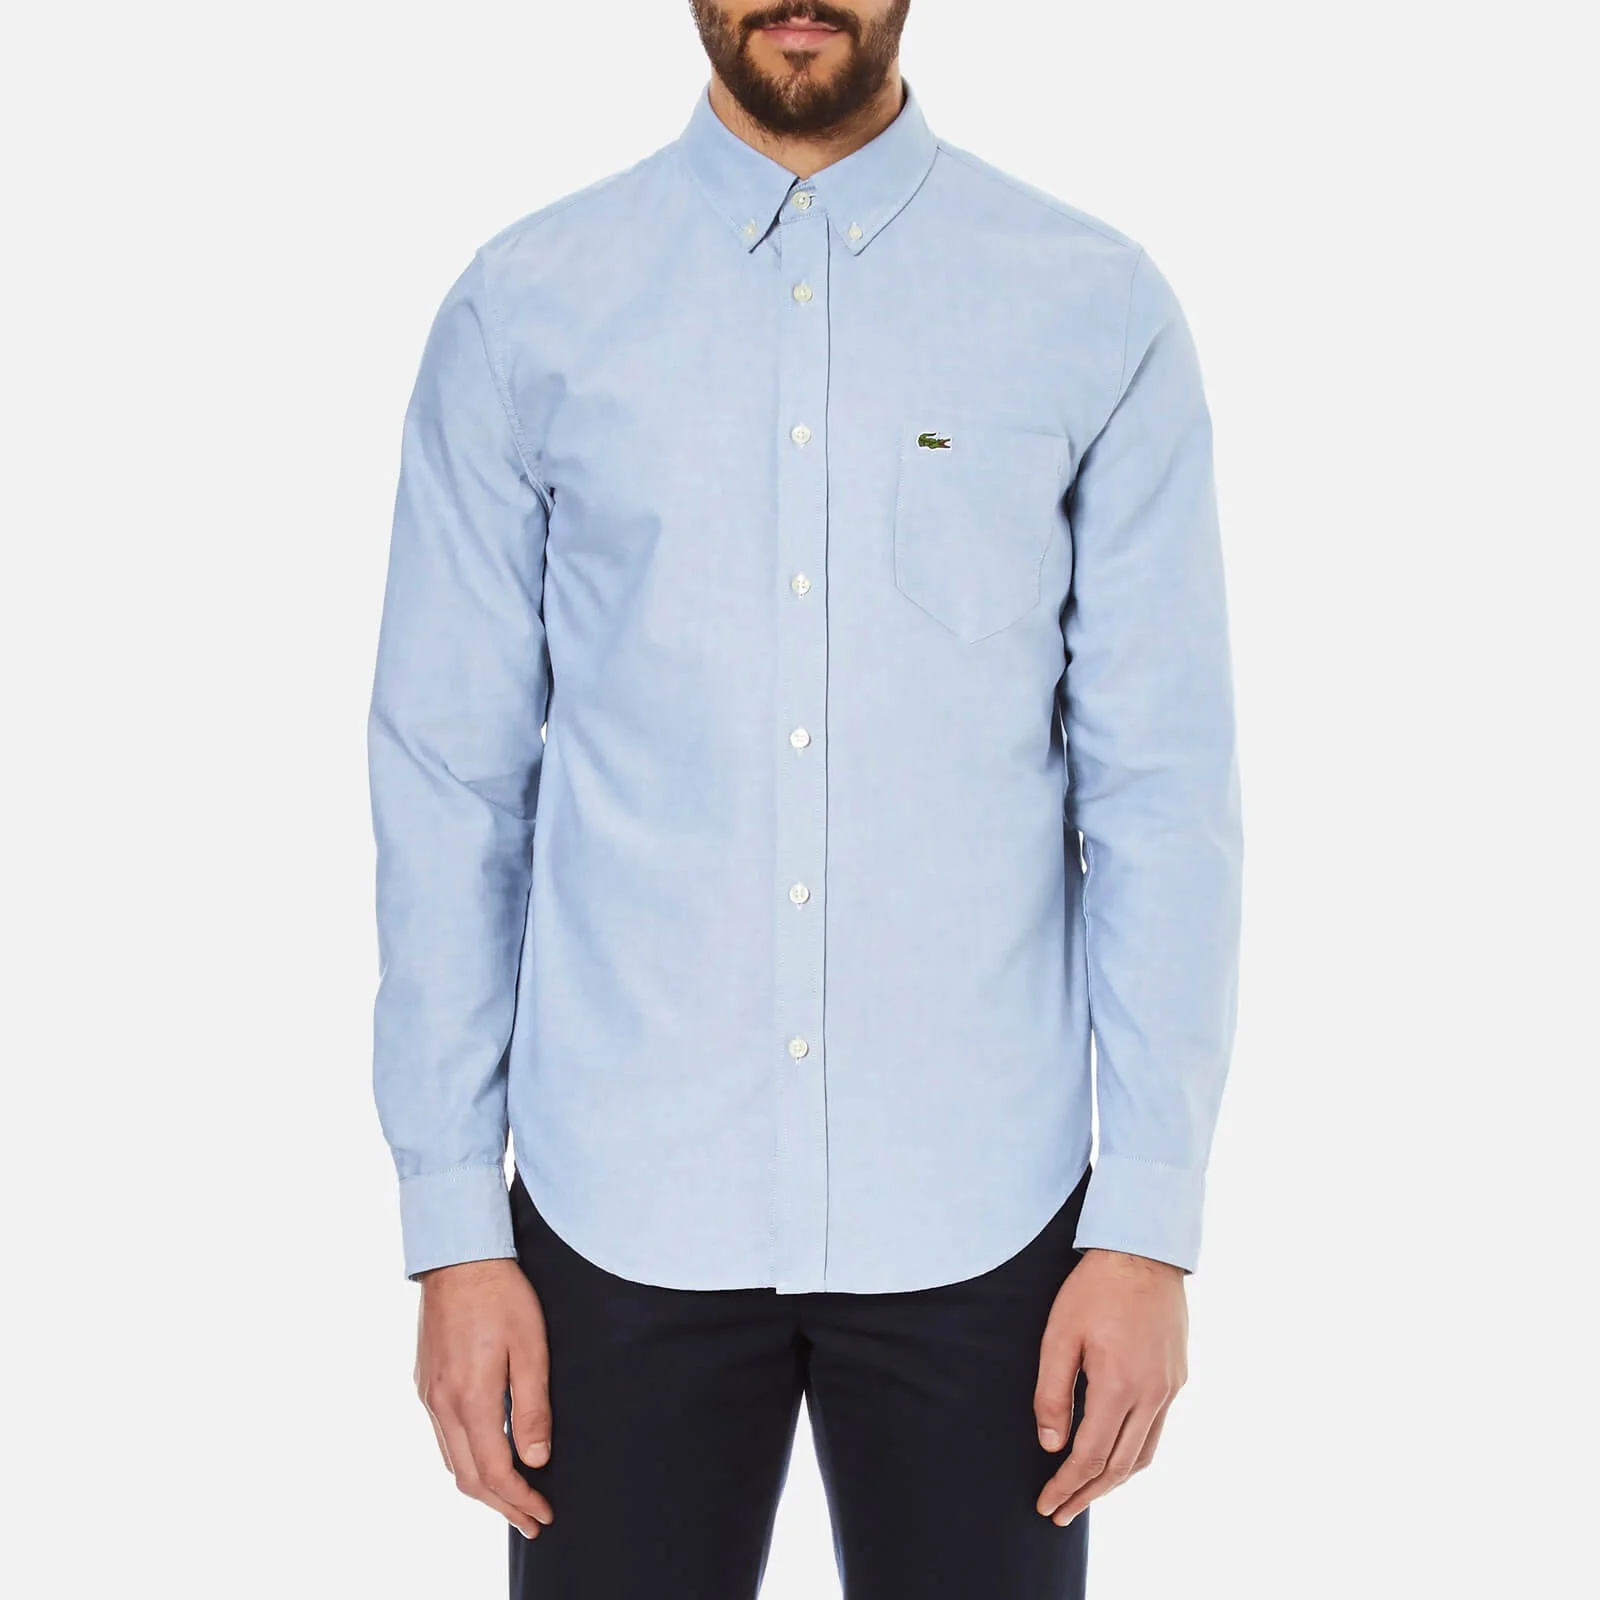 Lacoste Men's Oxford Button Down Pocket Shirt - Officer/White Image 1